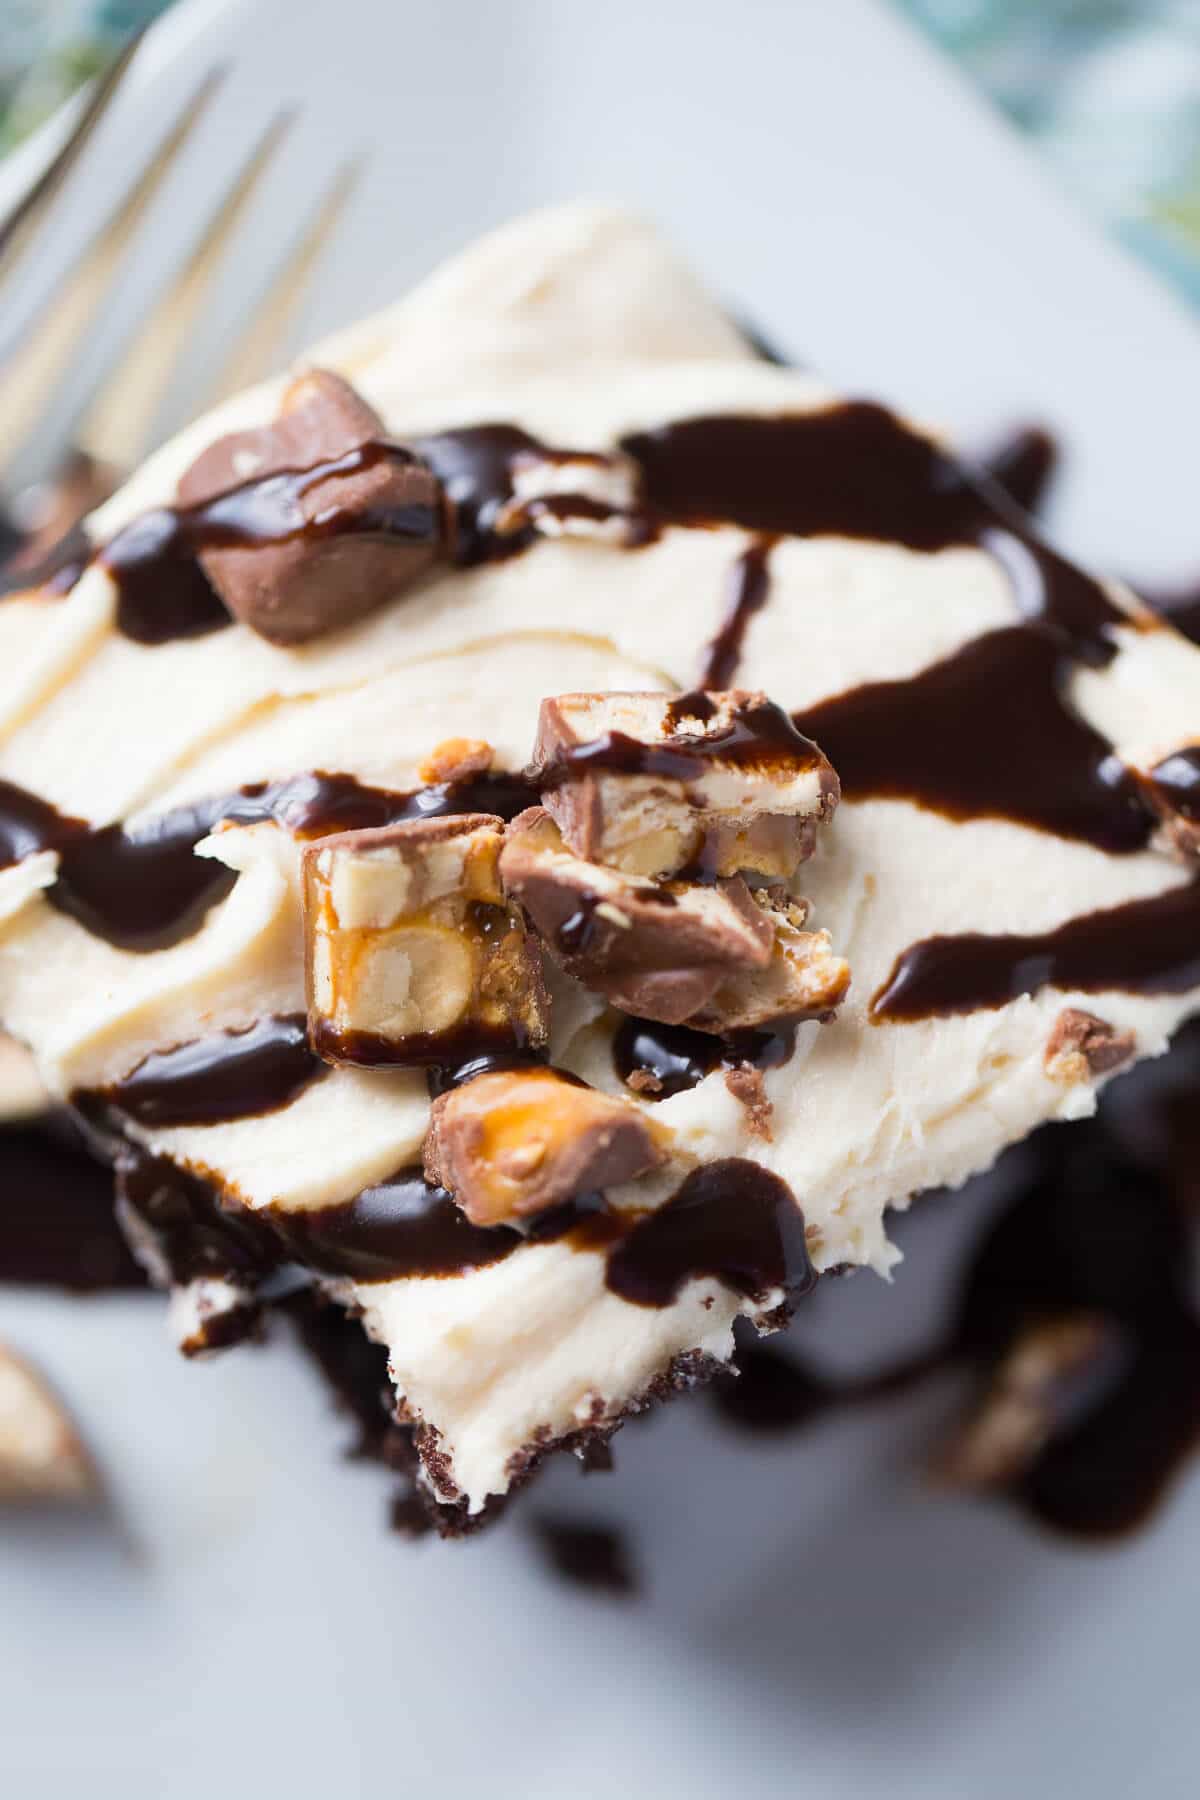 This Snickers Poke cake is the best! It has chocolate, caramel and Snickers candies, what else could you want?